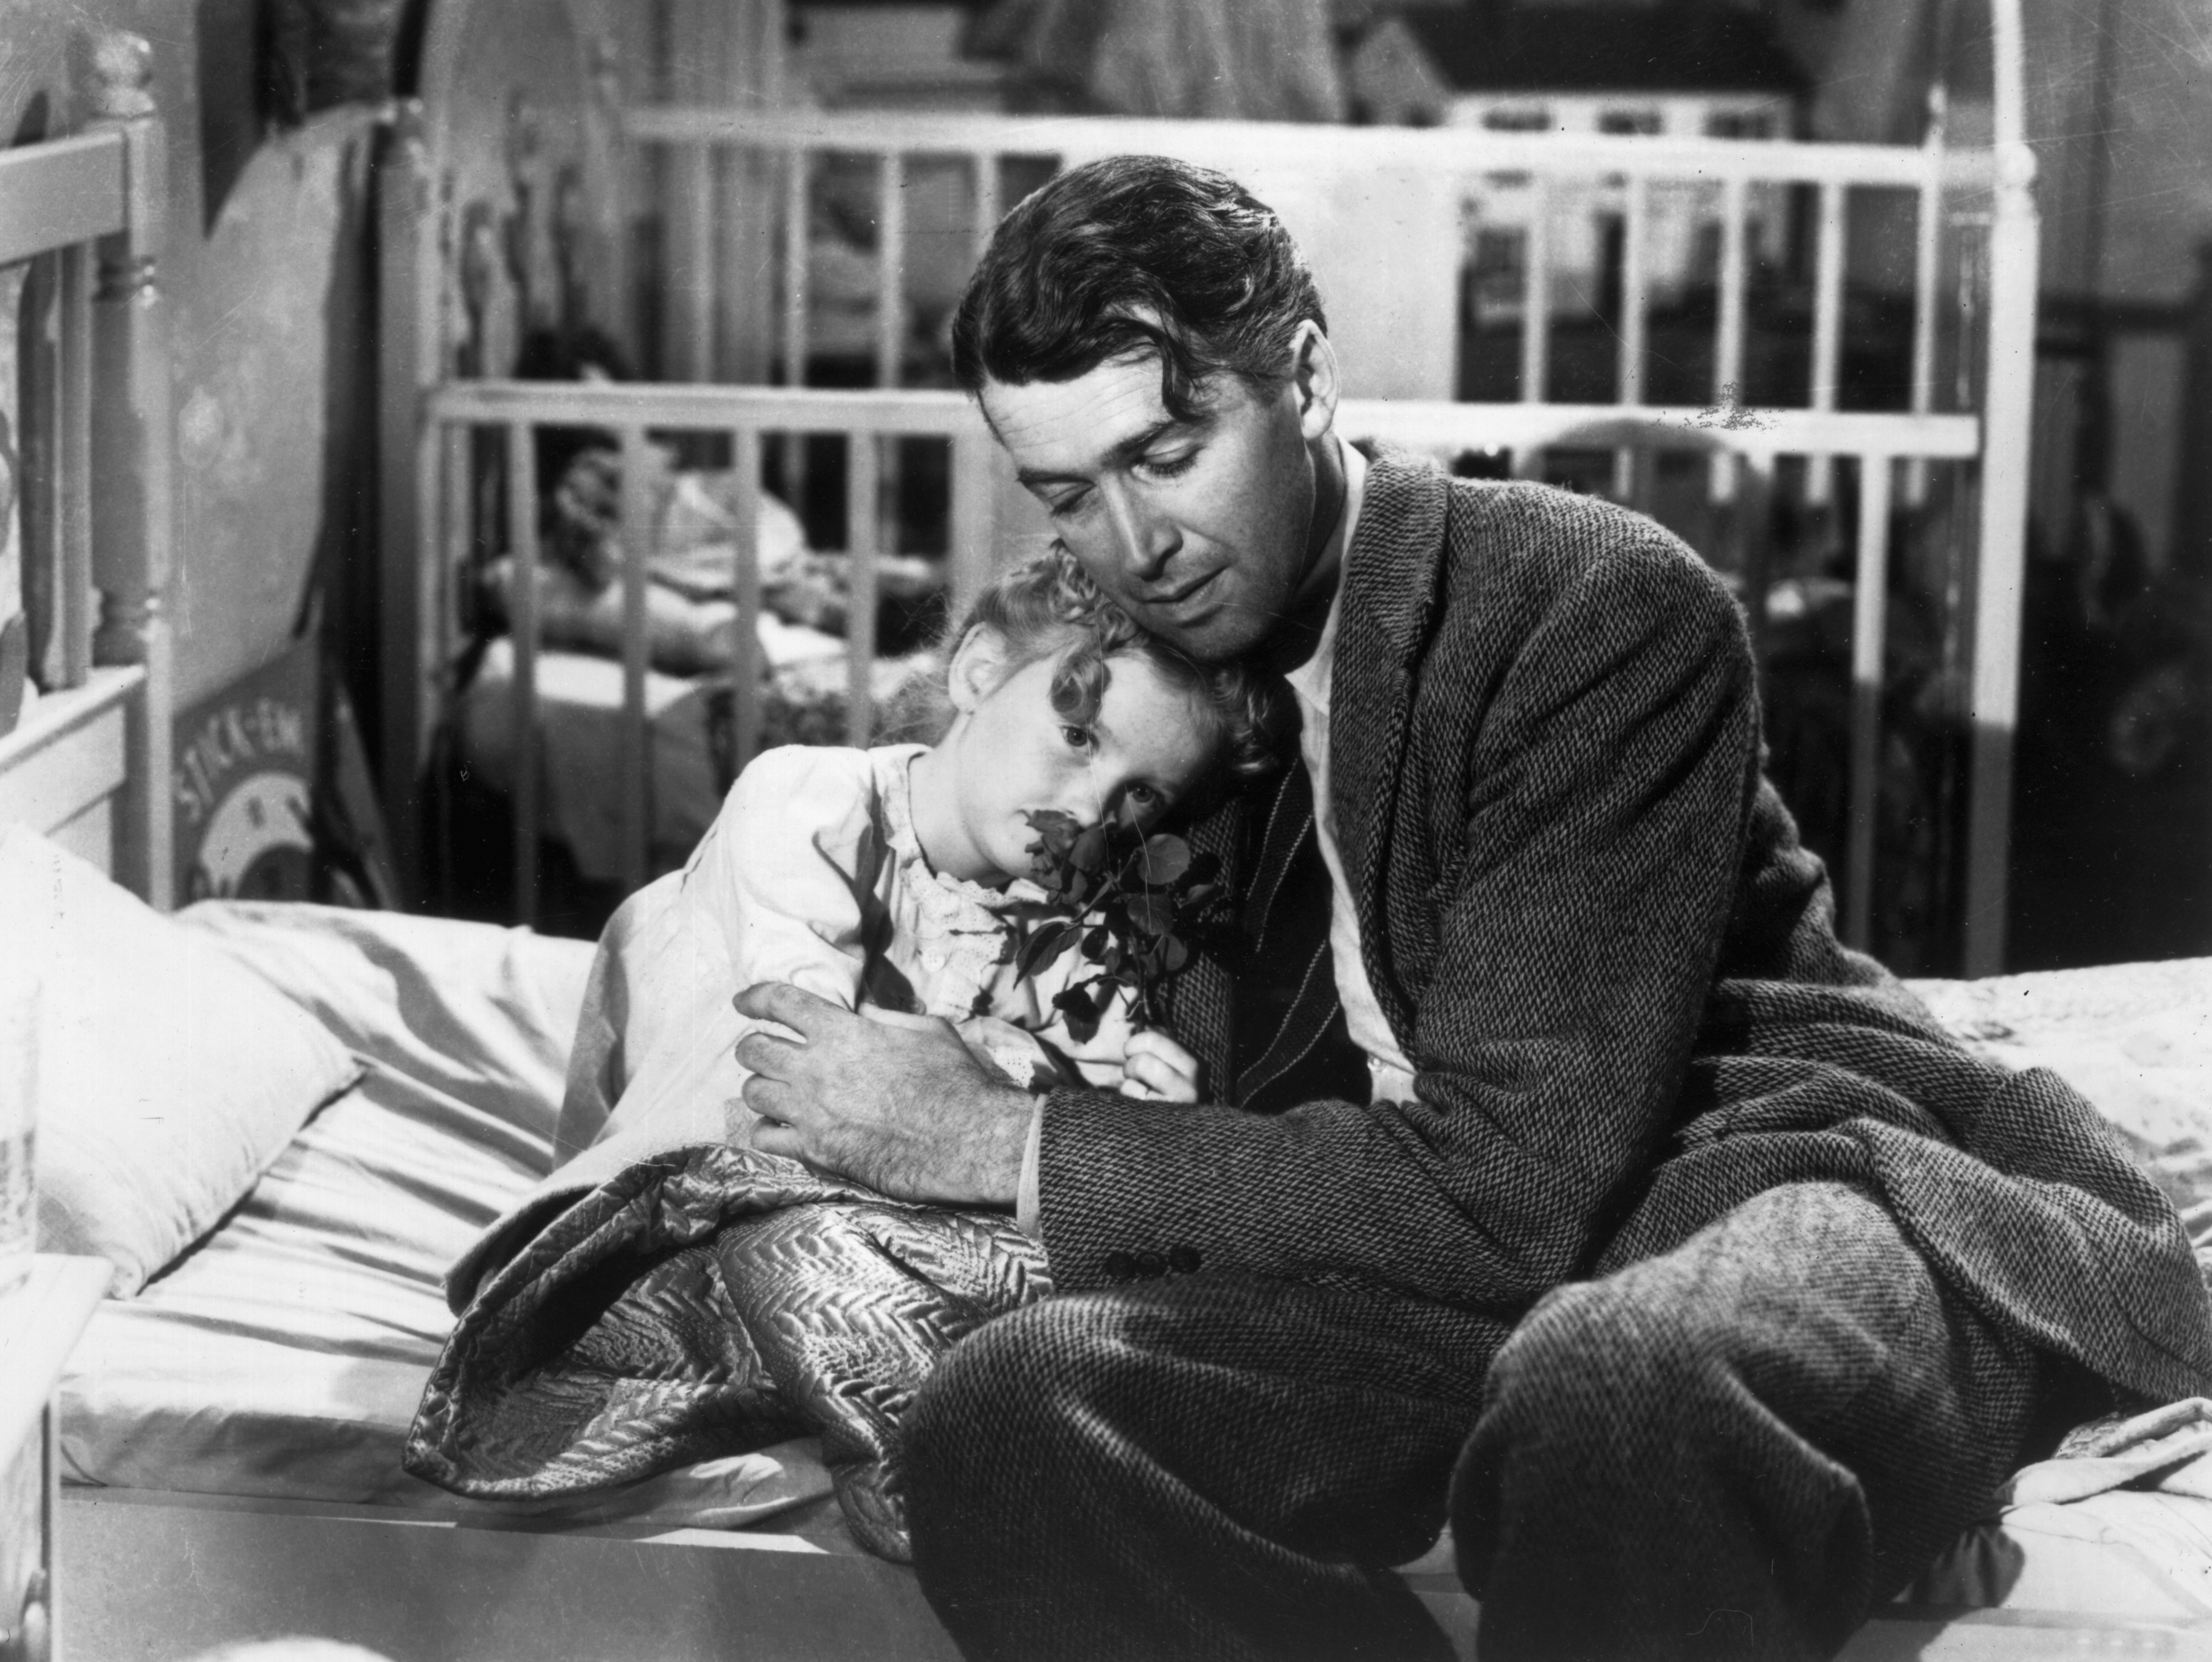 1946: American actor James Stewart (1908 - 1997) as George Bailey, hugs actor Karolyn Grimes, who plays Zuzu his daughter, in a still from director Frank Capra's Christmas classic film, 'It's a Wonderful Life'. (Photo by Hulton Archive/Getty Images)